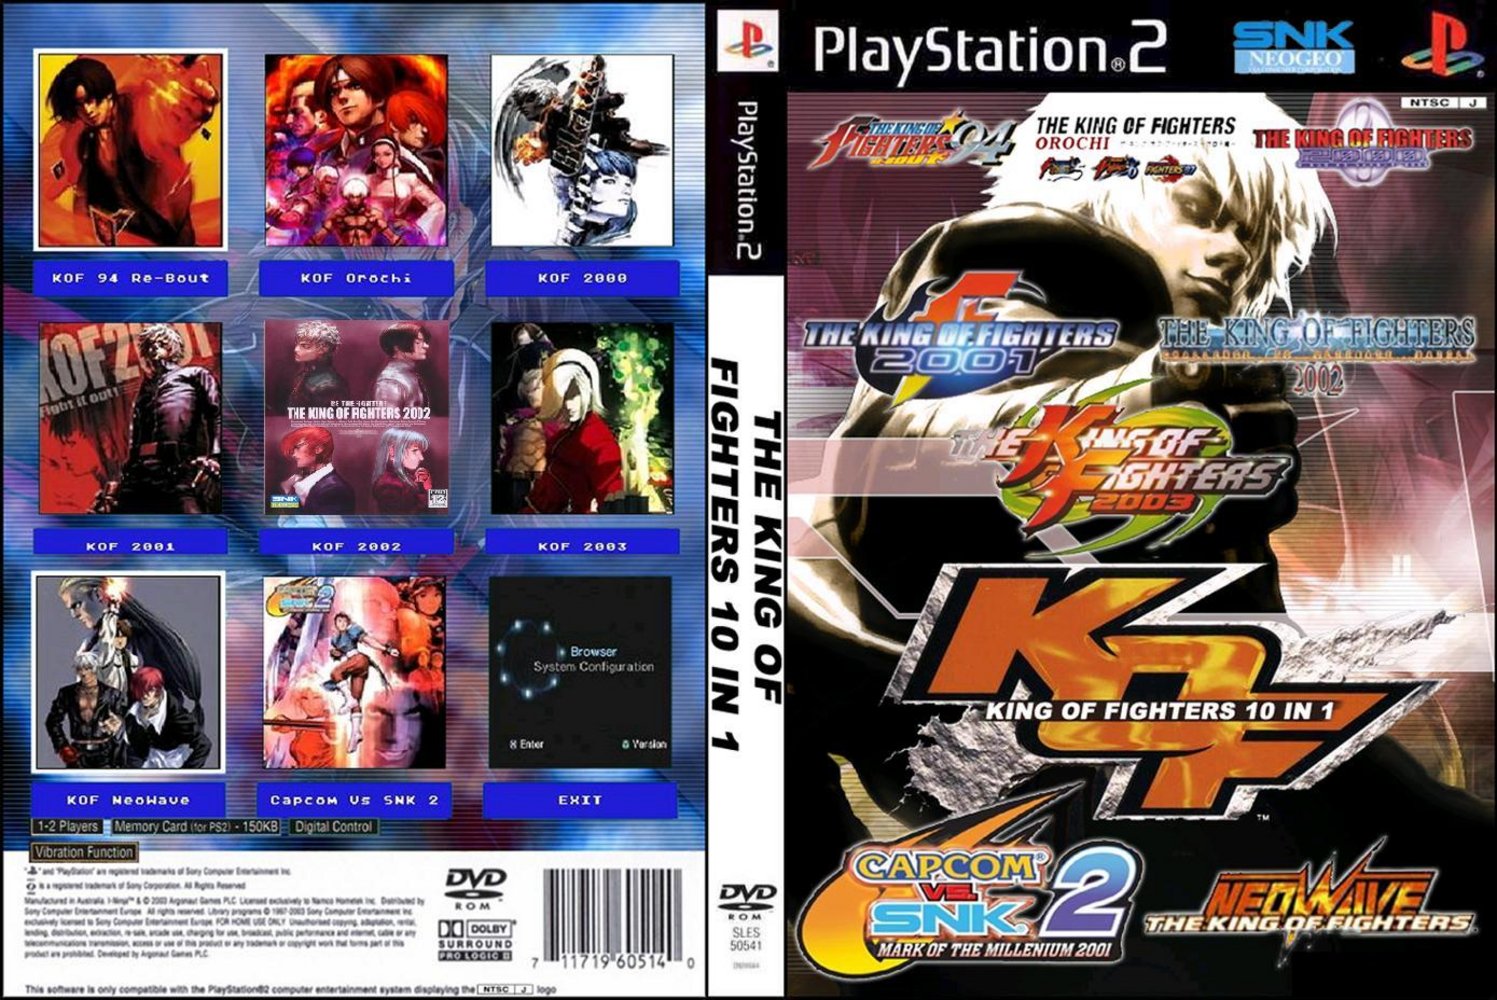 Iso образ игр ps2. KOF ps2. The King of Fighters 2000 ps2. King of Fighters ps1. The King of Fighters 2002 ps2.